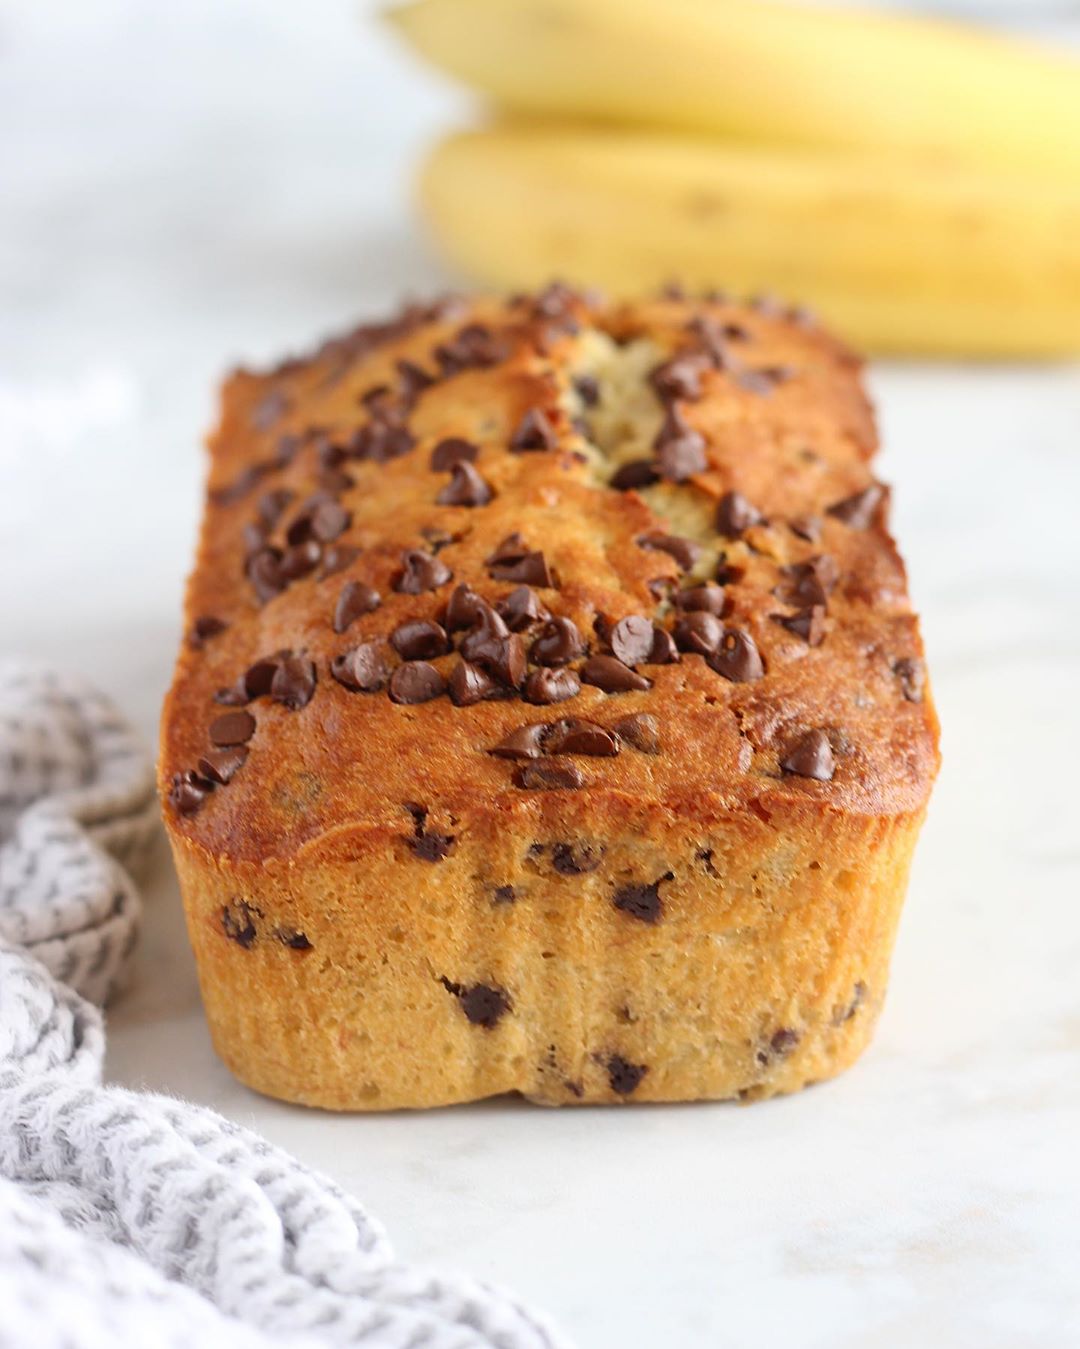 CHOCOLATE CHIP BANANA BREAD OR MUFFINS - Ambers Kitchen Cooks